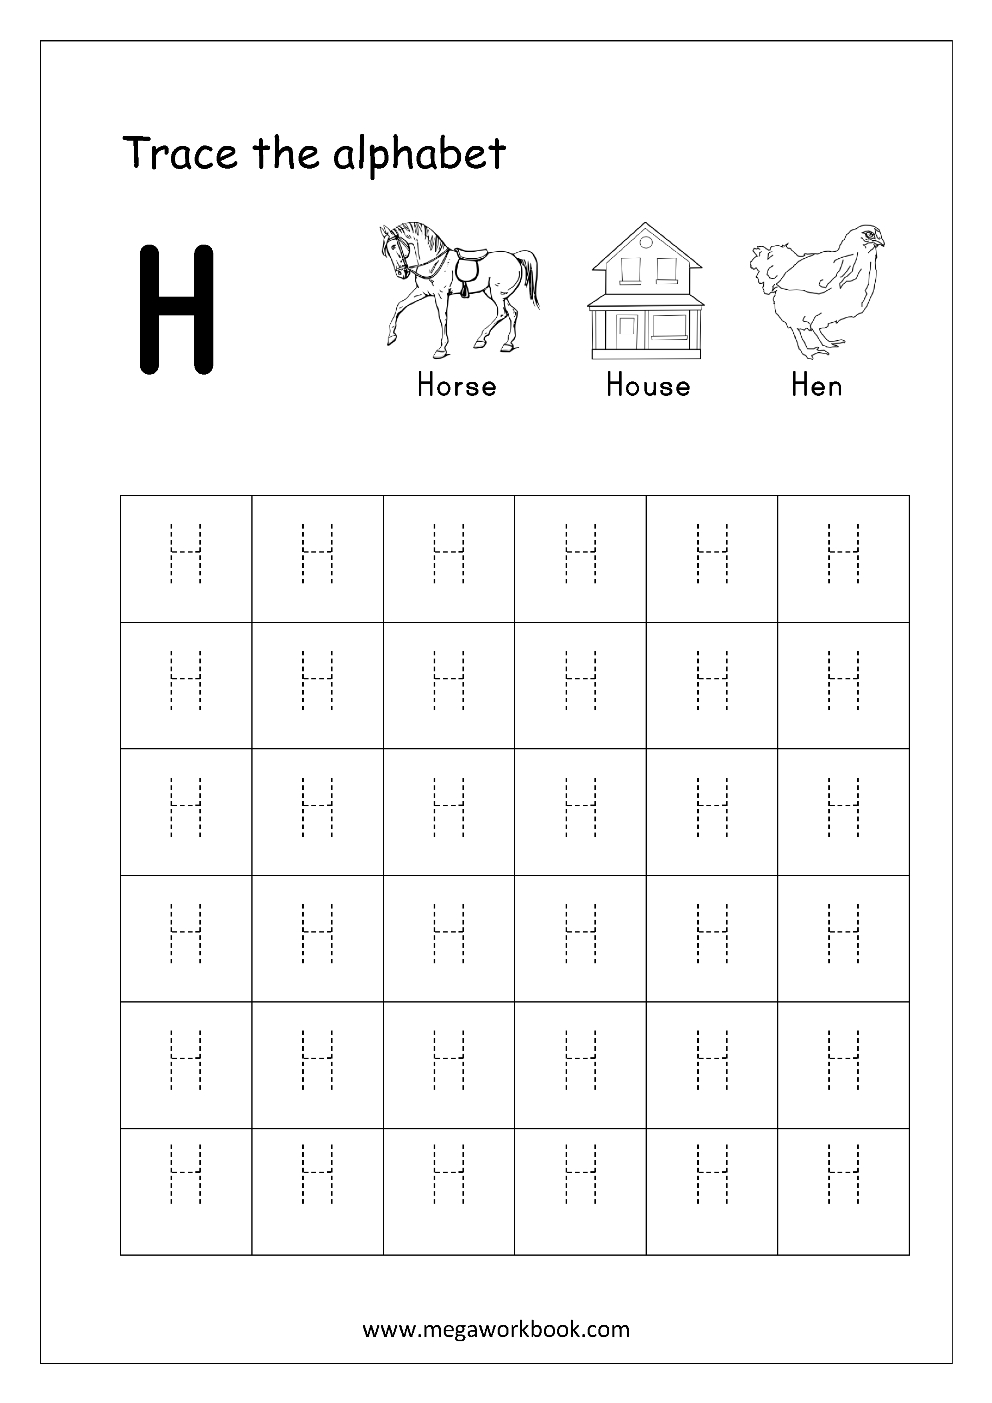 Lkg Es Worksheets Free Download Tracing Letters Alphabet intended for Capital Letters Tracing Sheets